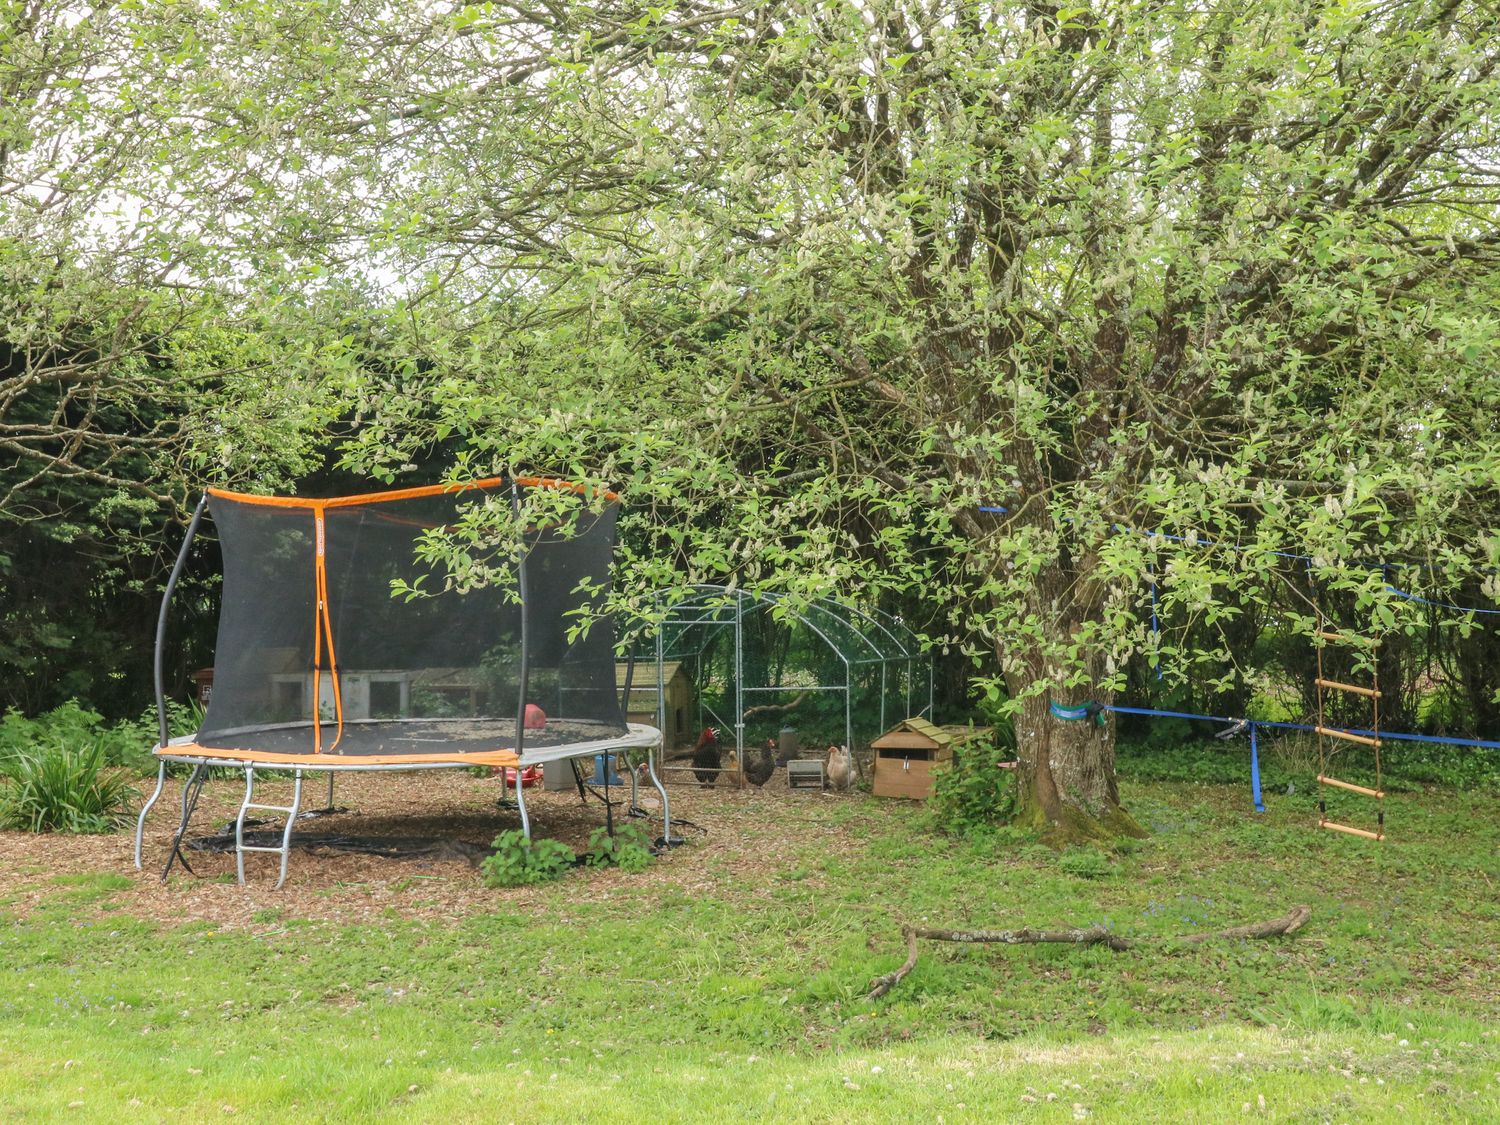 The Barn, Brixton, Devon, near Dartmoor National Park. Open-Plan, Swimming Pool, Barbecue, Outhouse.